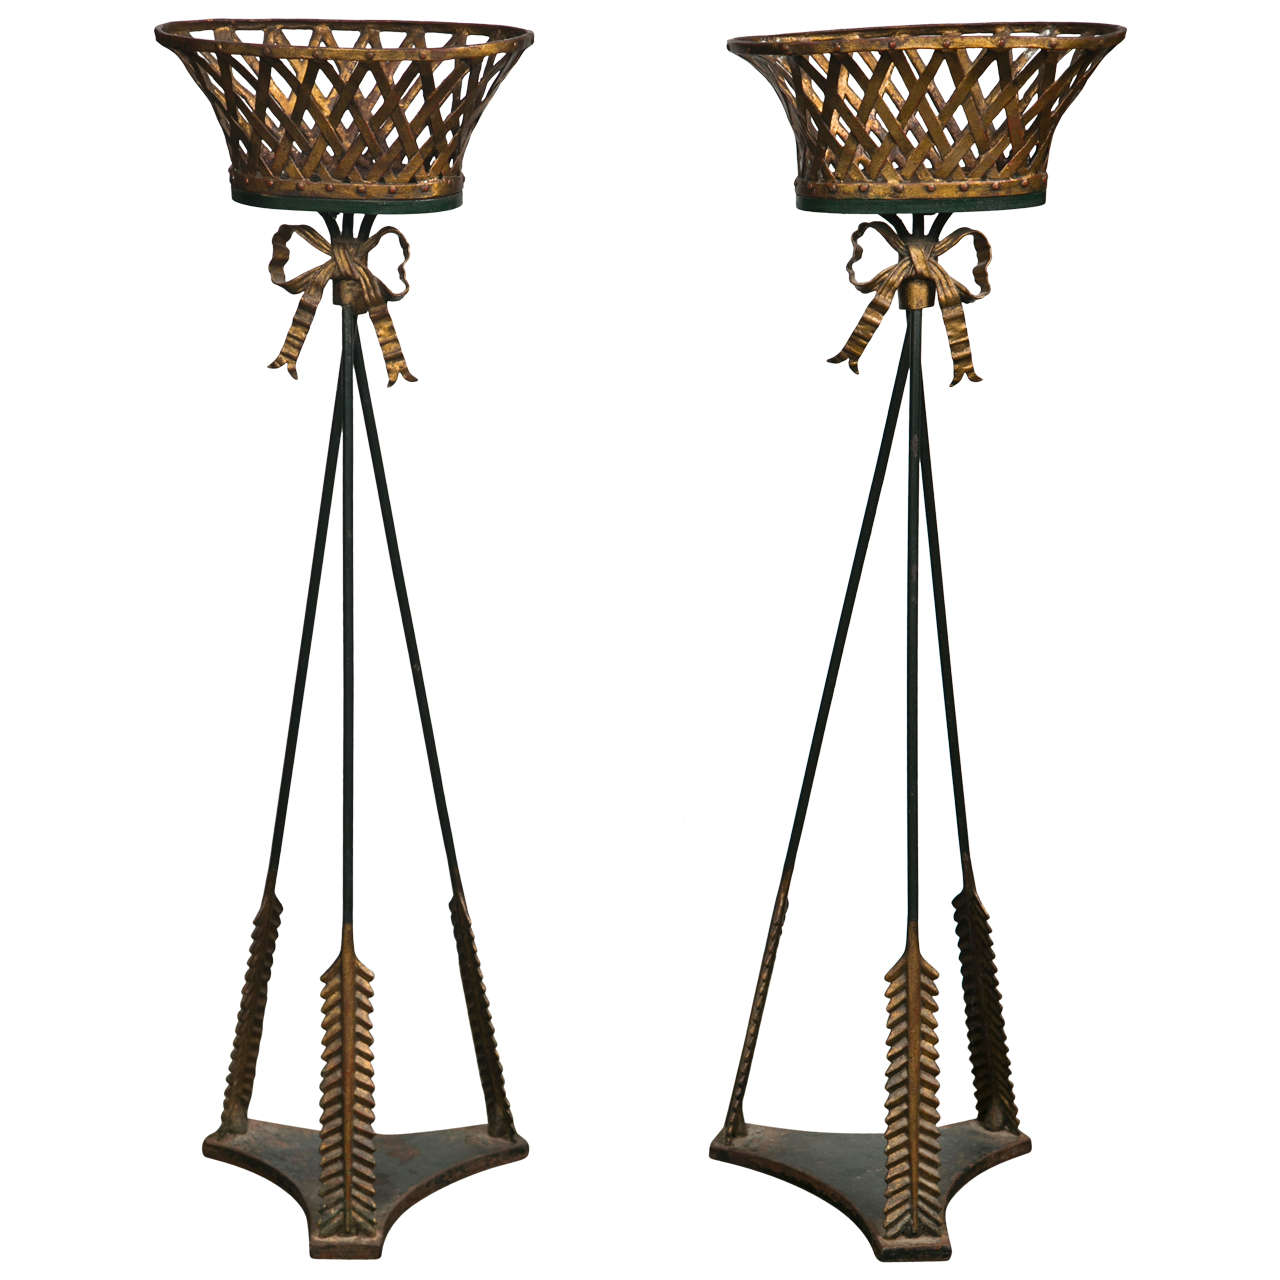 Pair of Basket Form Jardinieres For Sale